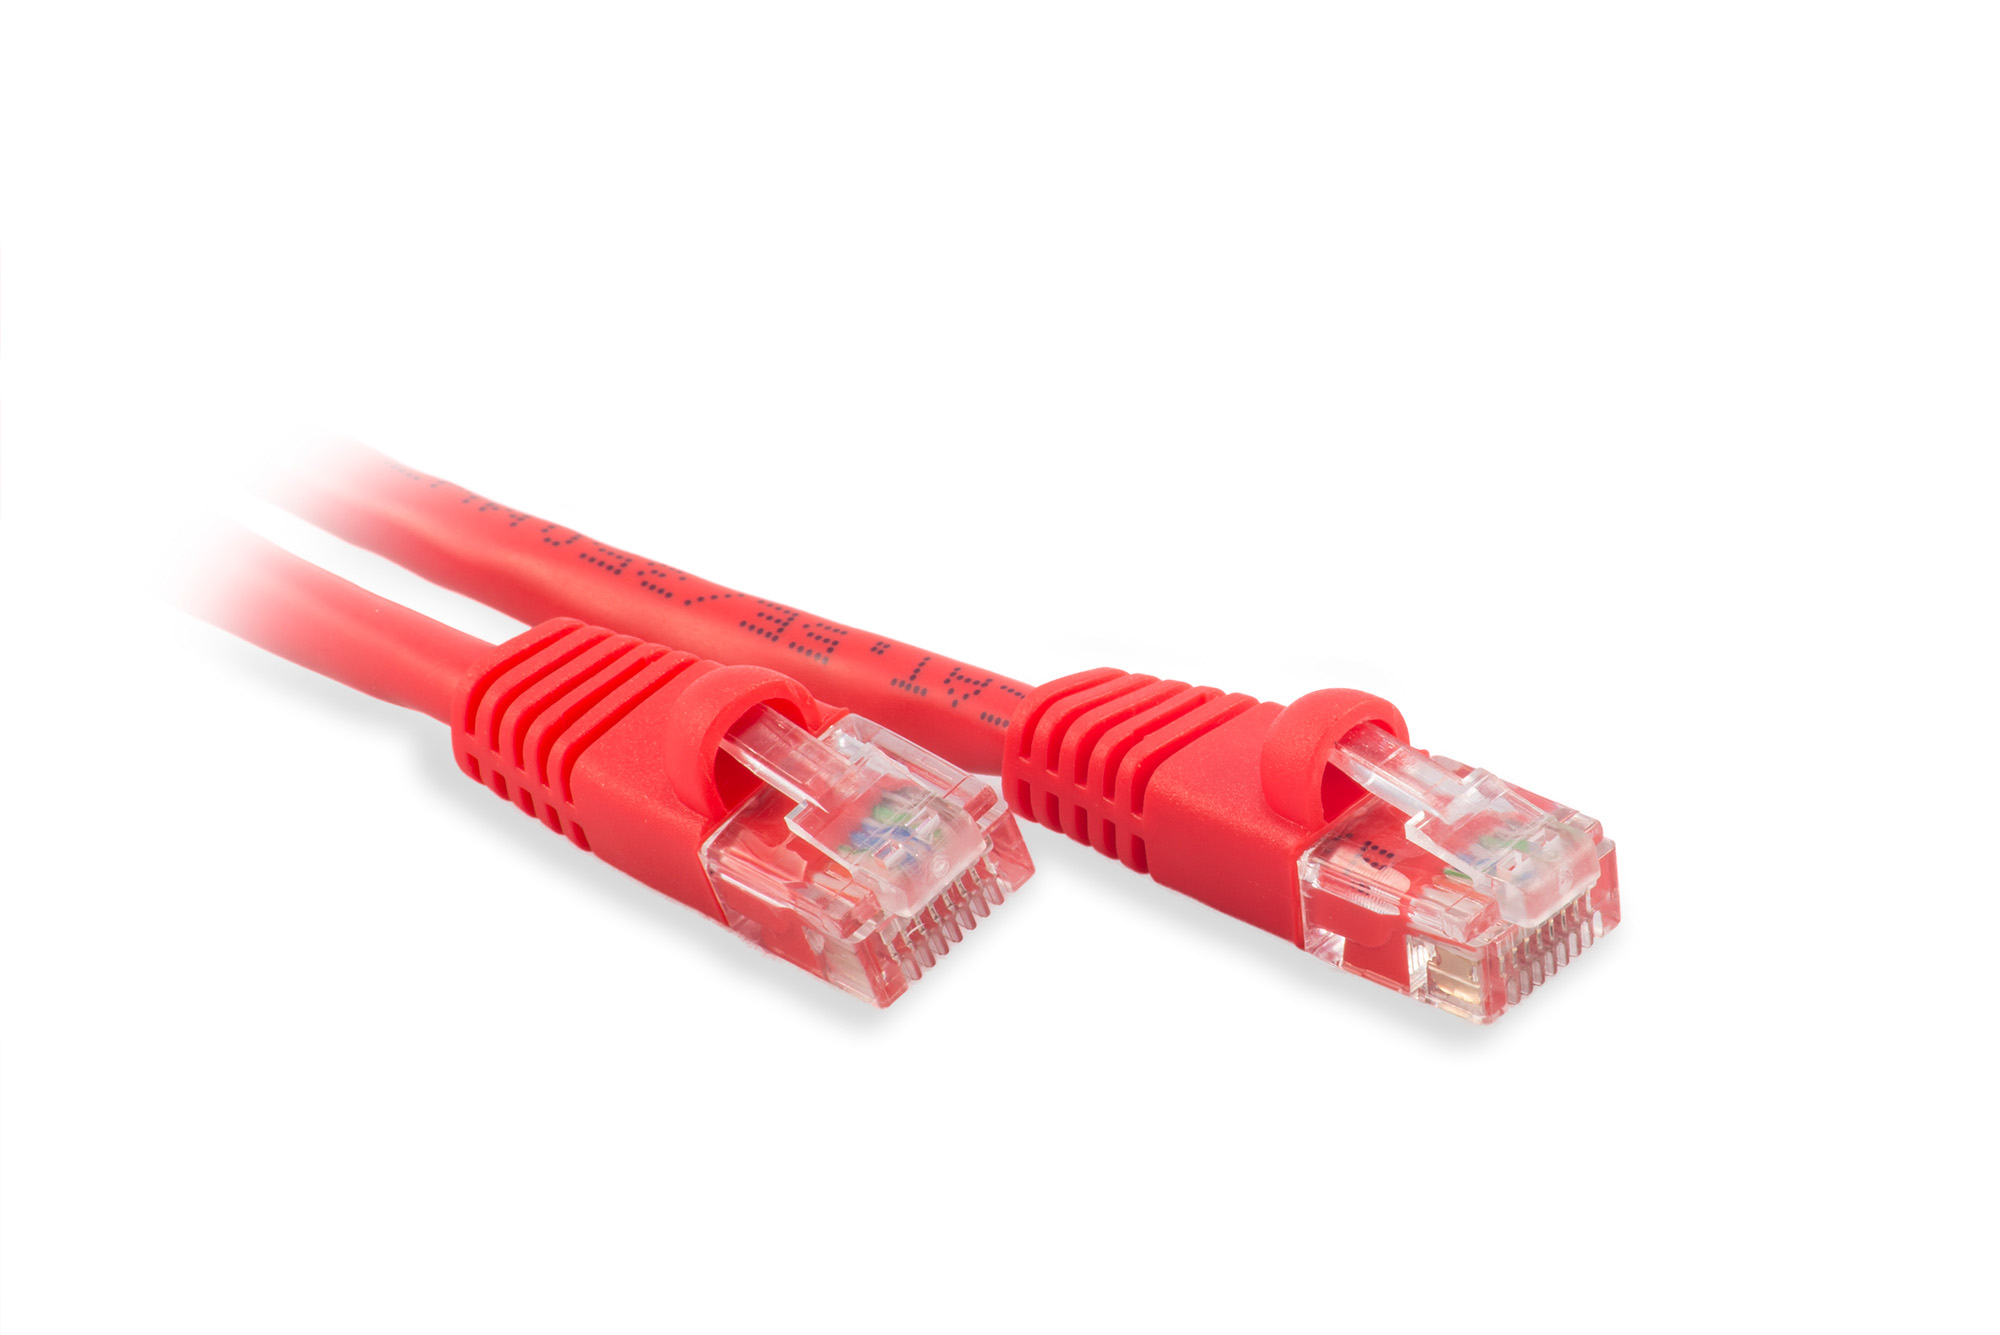 3ft Cat6 Ethernet Patch Cable - Red Color - Snagless Boot, Stranded, RJ45, 550Mhz, 24AWG